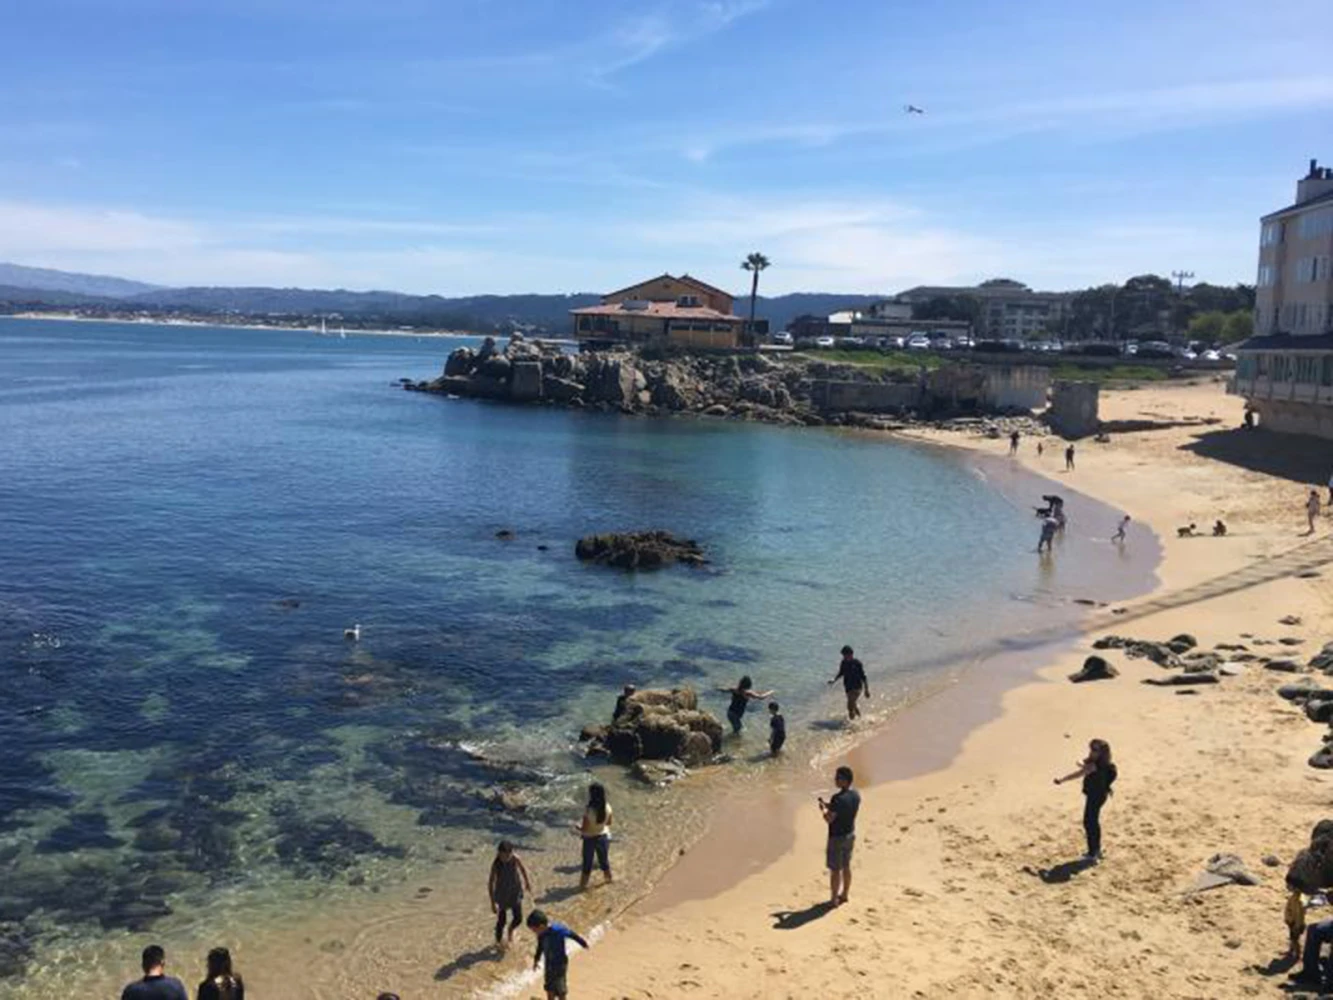 Monterey, Carmel & 17-Mile Full Day Tour: What to expect - 3